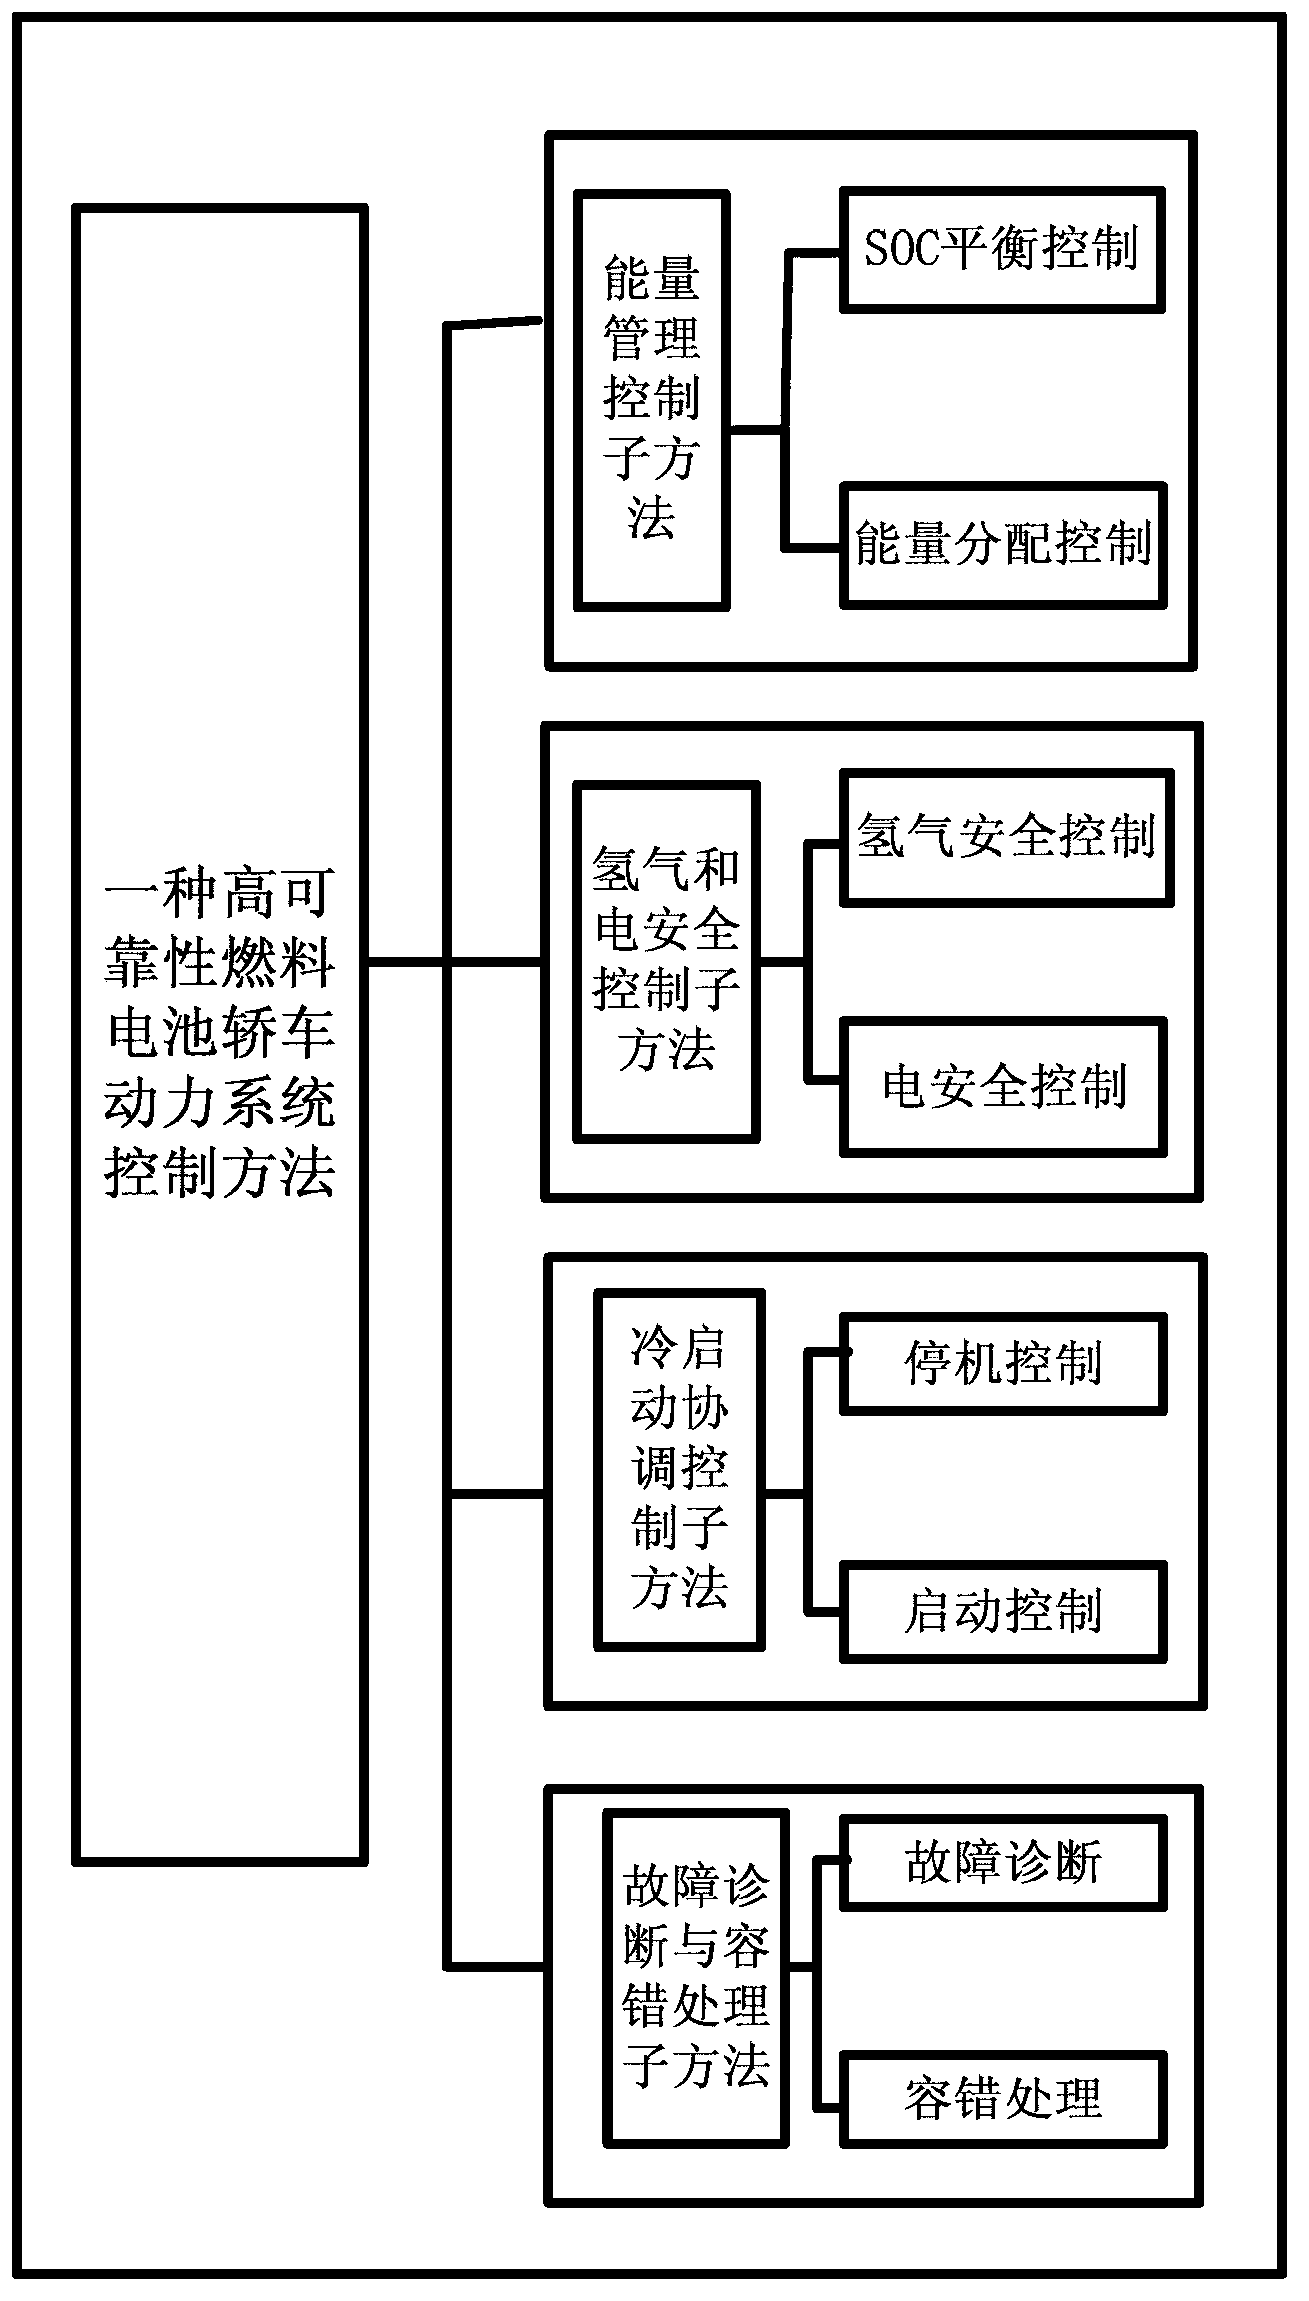 Control method of high reliability fuel cell car power system